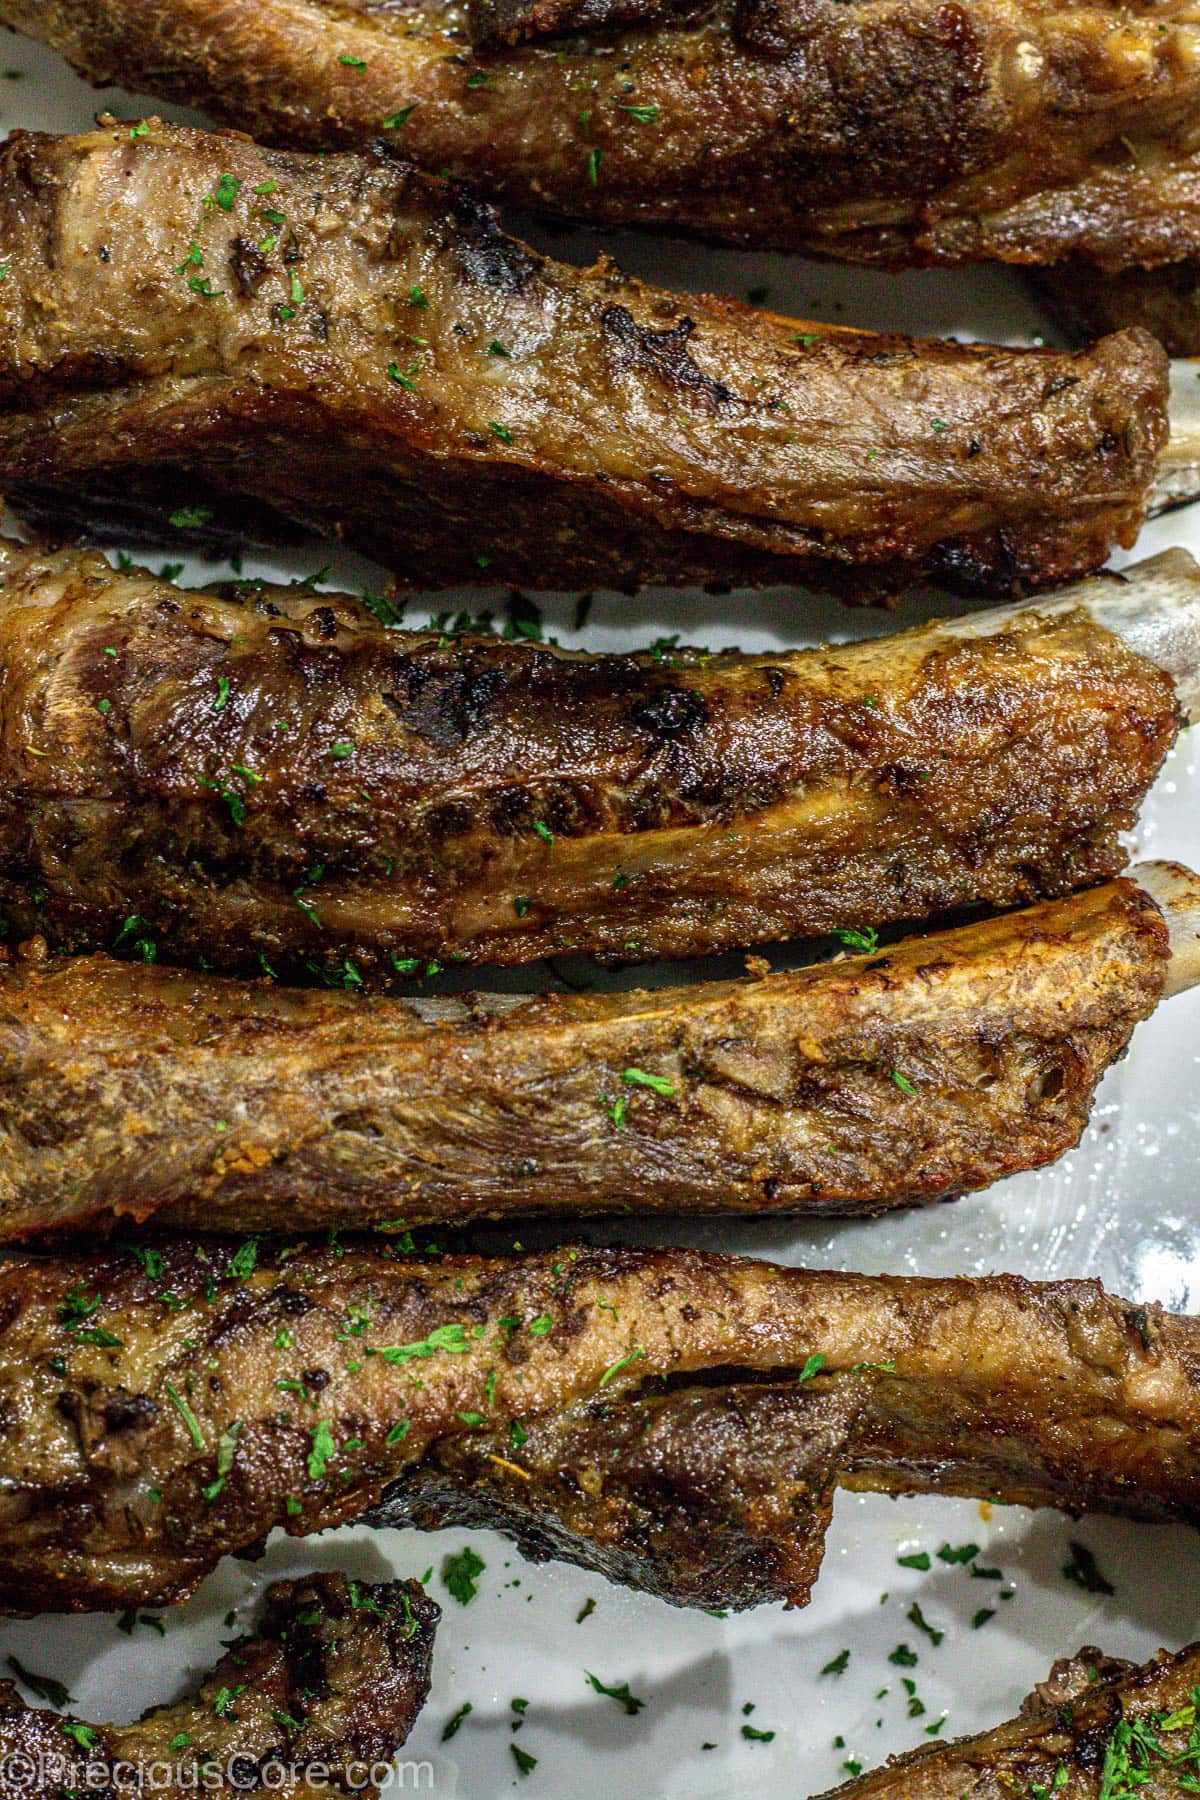 Broiled ribs on a white serving platter.